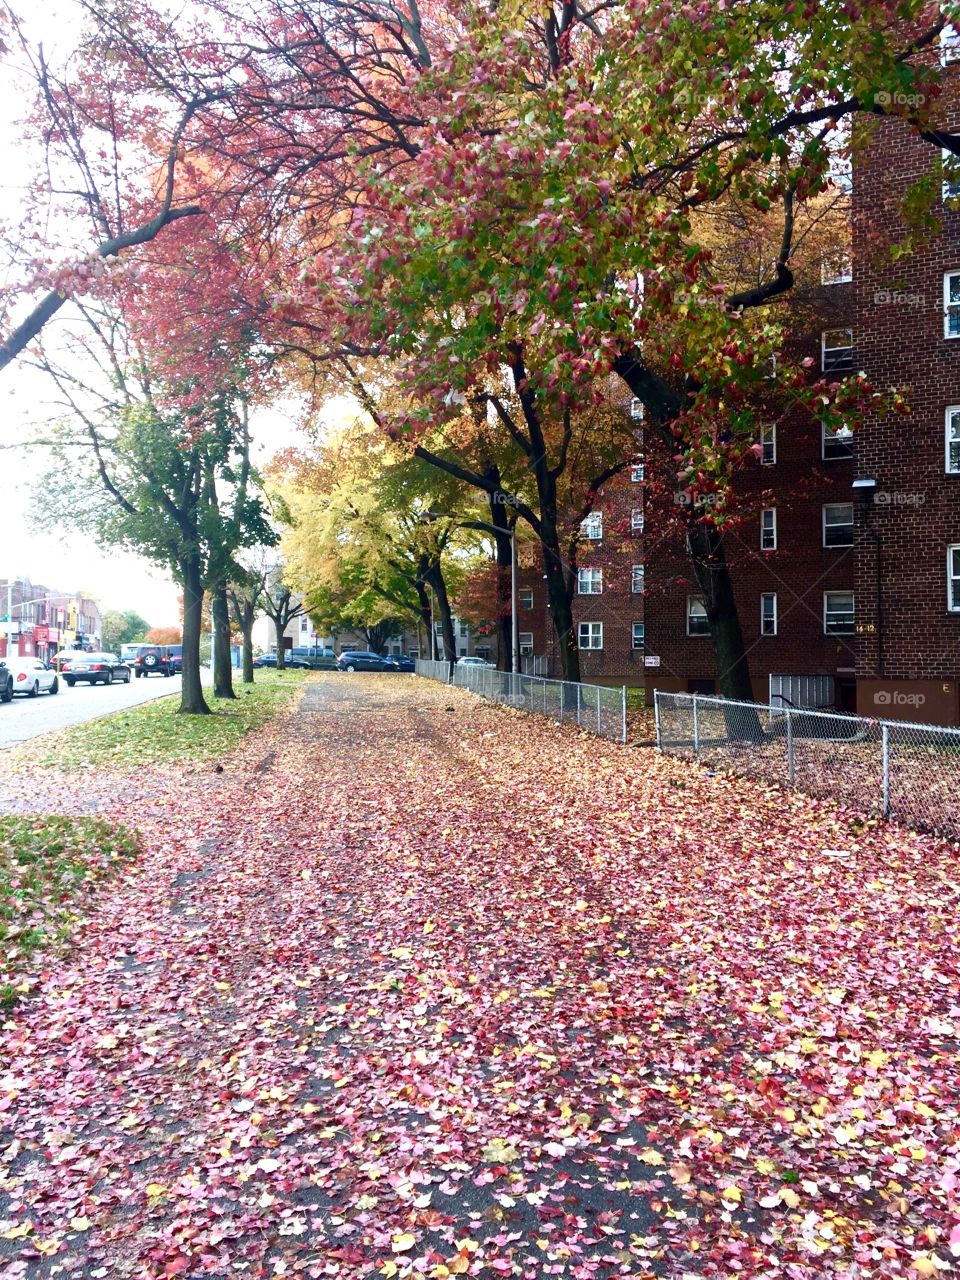 Autumn mat of beautiful colors of fall leaves on sidewalk in Brooklyn, New York.